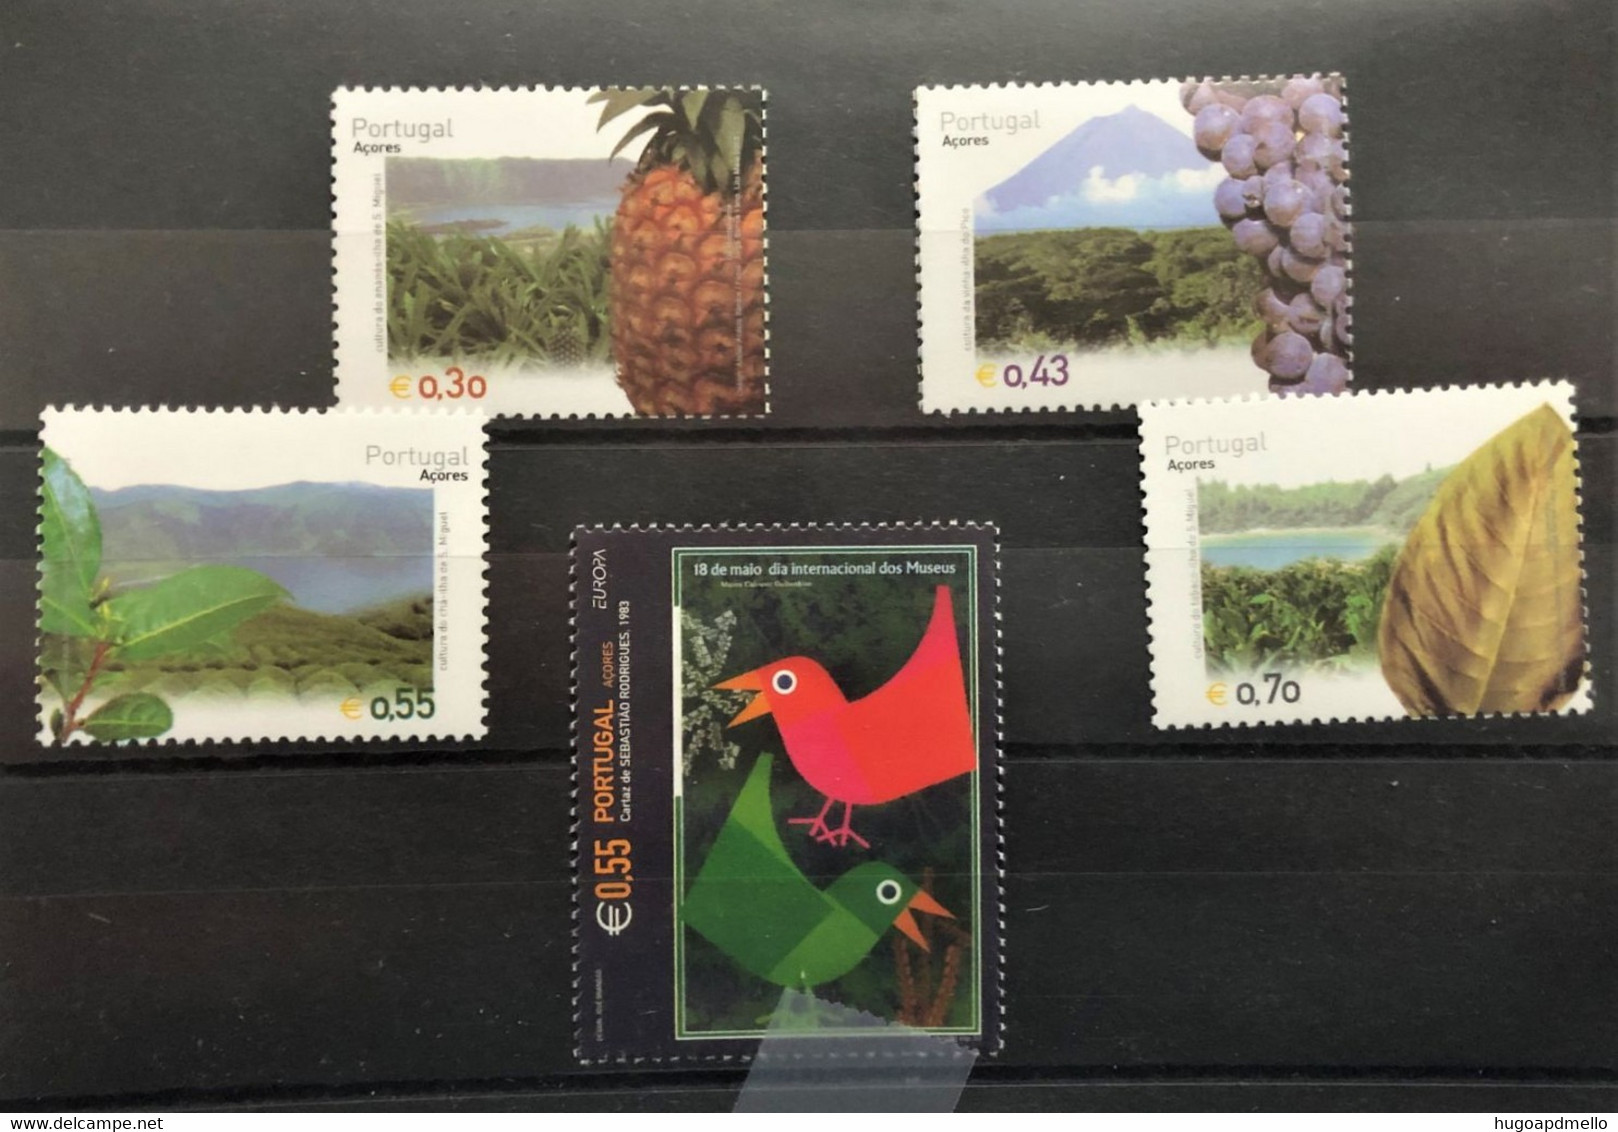 PORTUGAL, AZORES, « FULL YEAR »,Mint Stamps Without Blocks, 2003 - Annate Complete